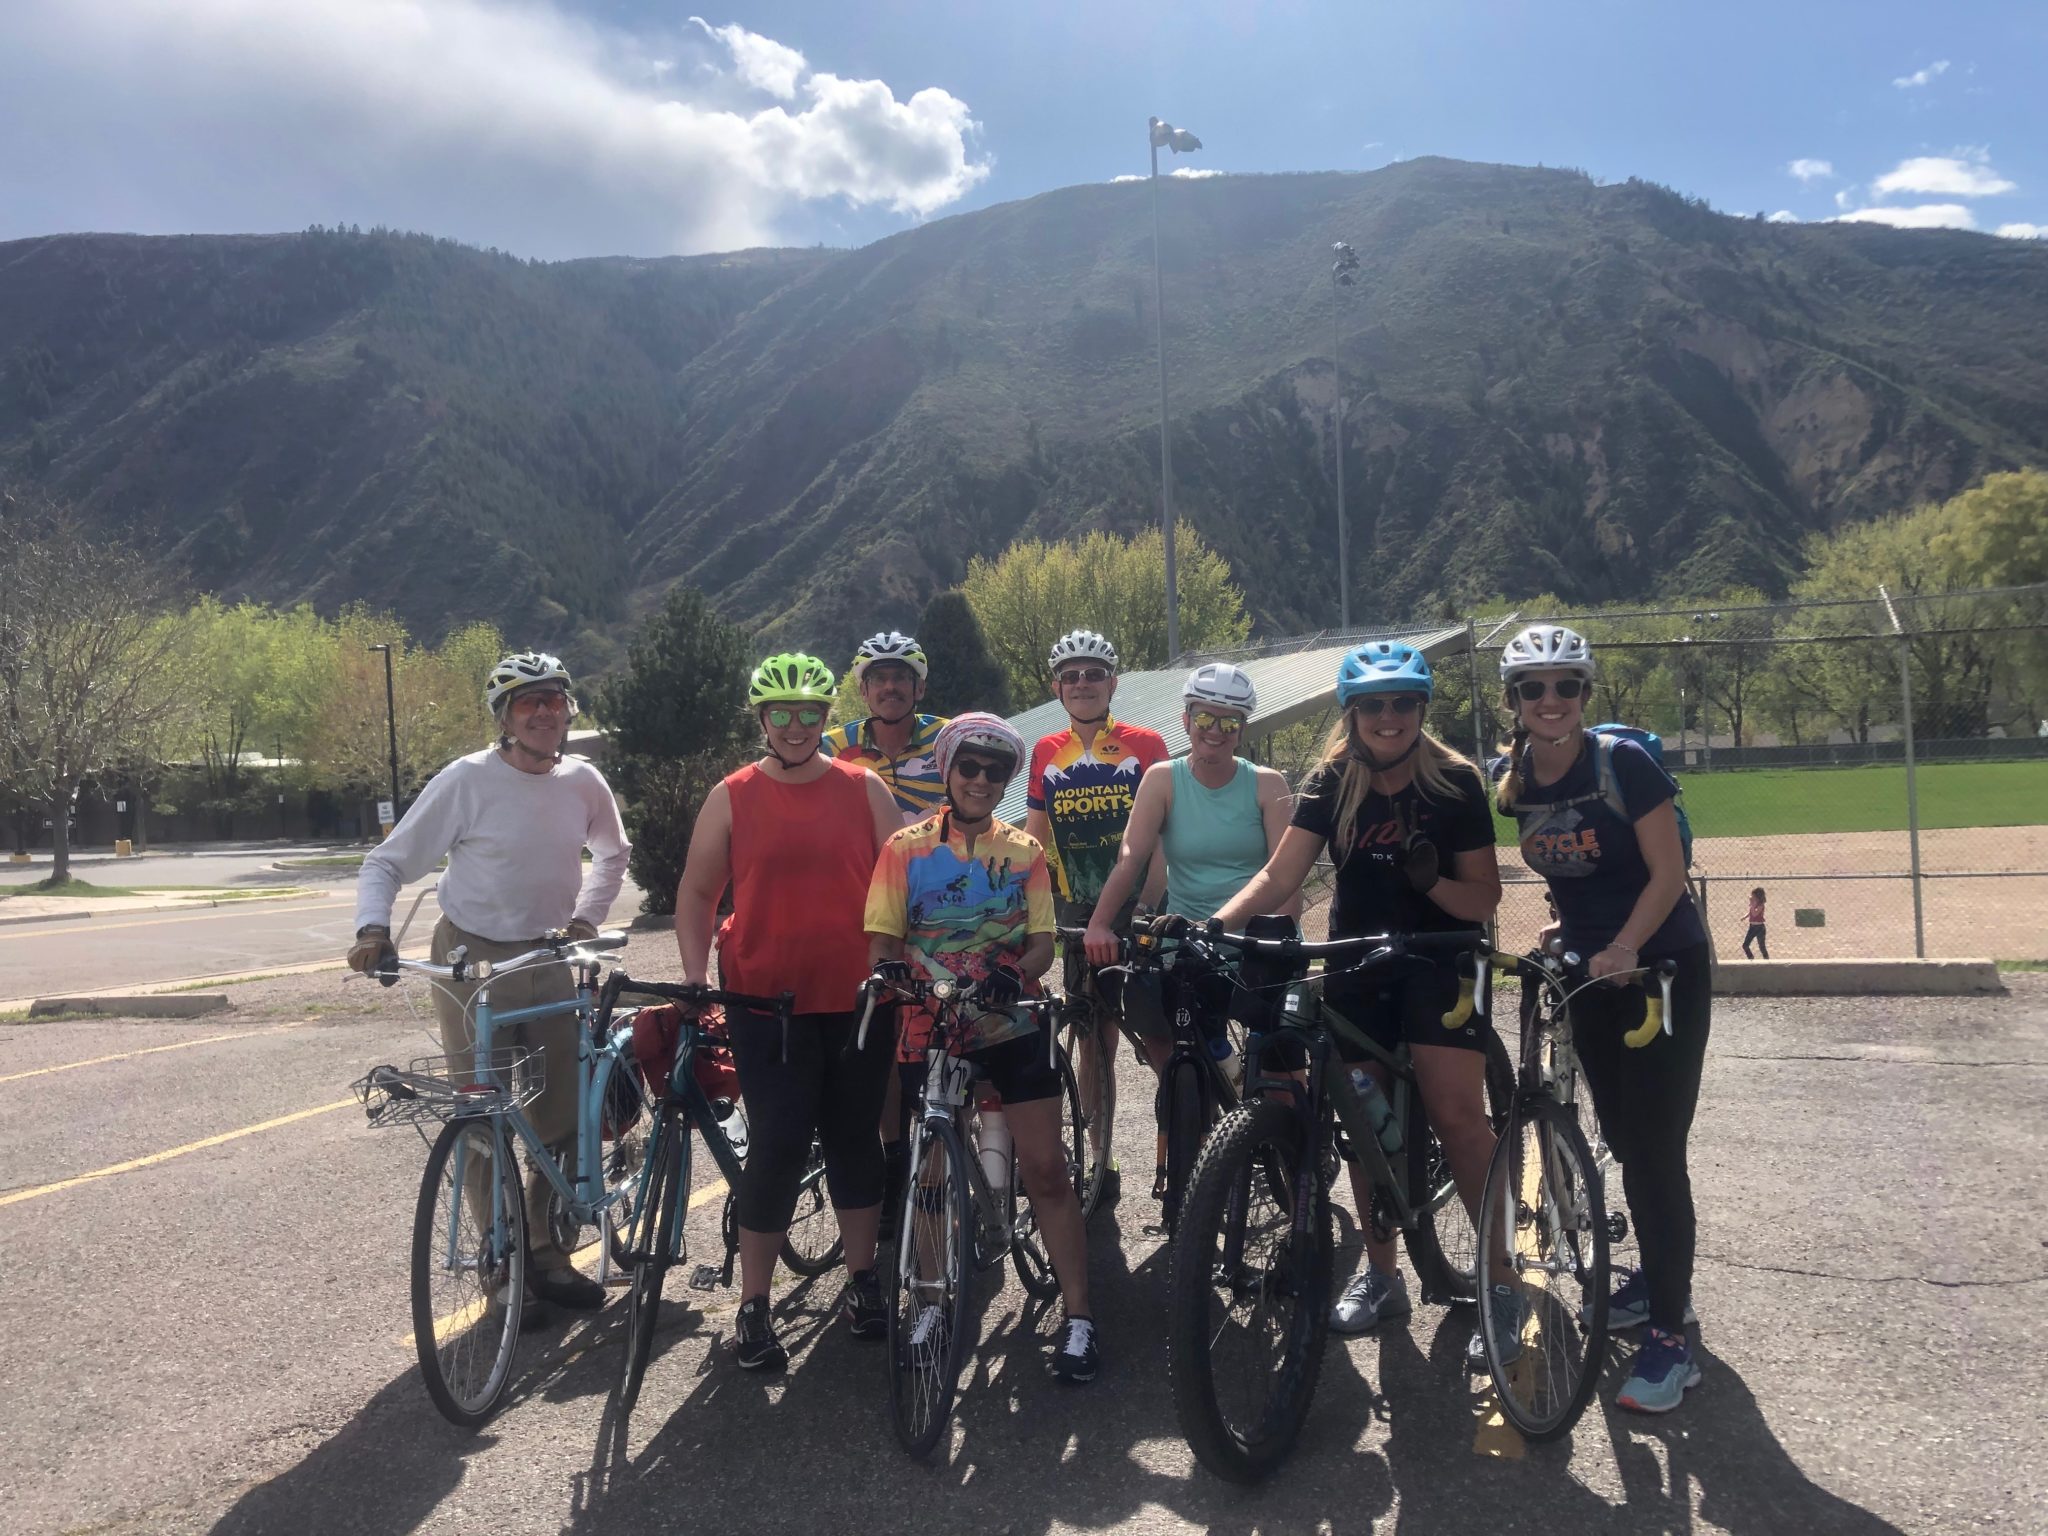 Eight people pose with bicycles in a parking lot below large hills.